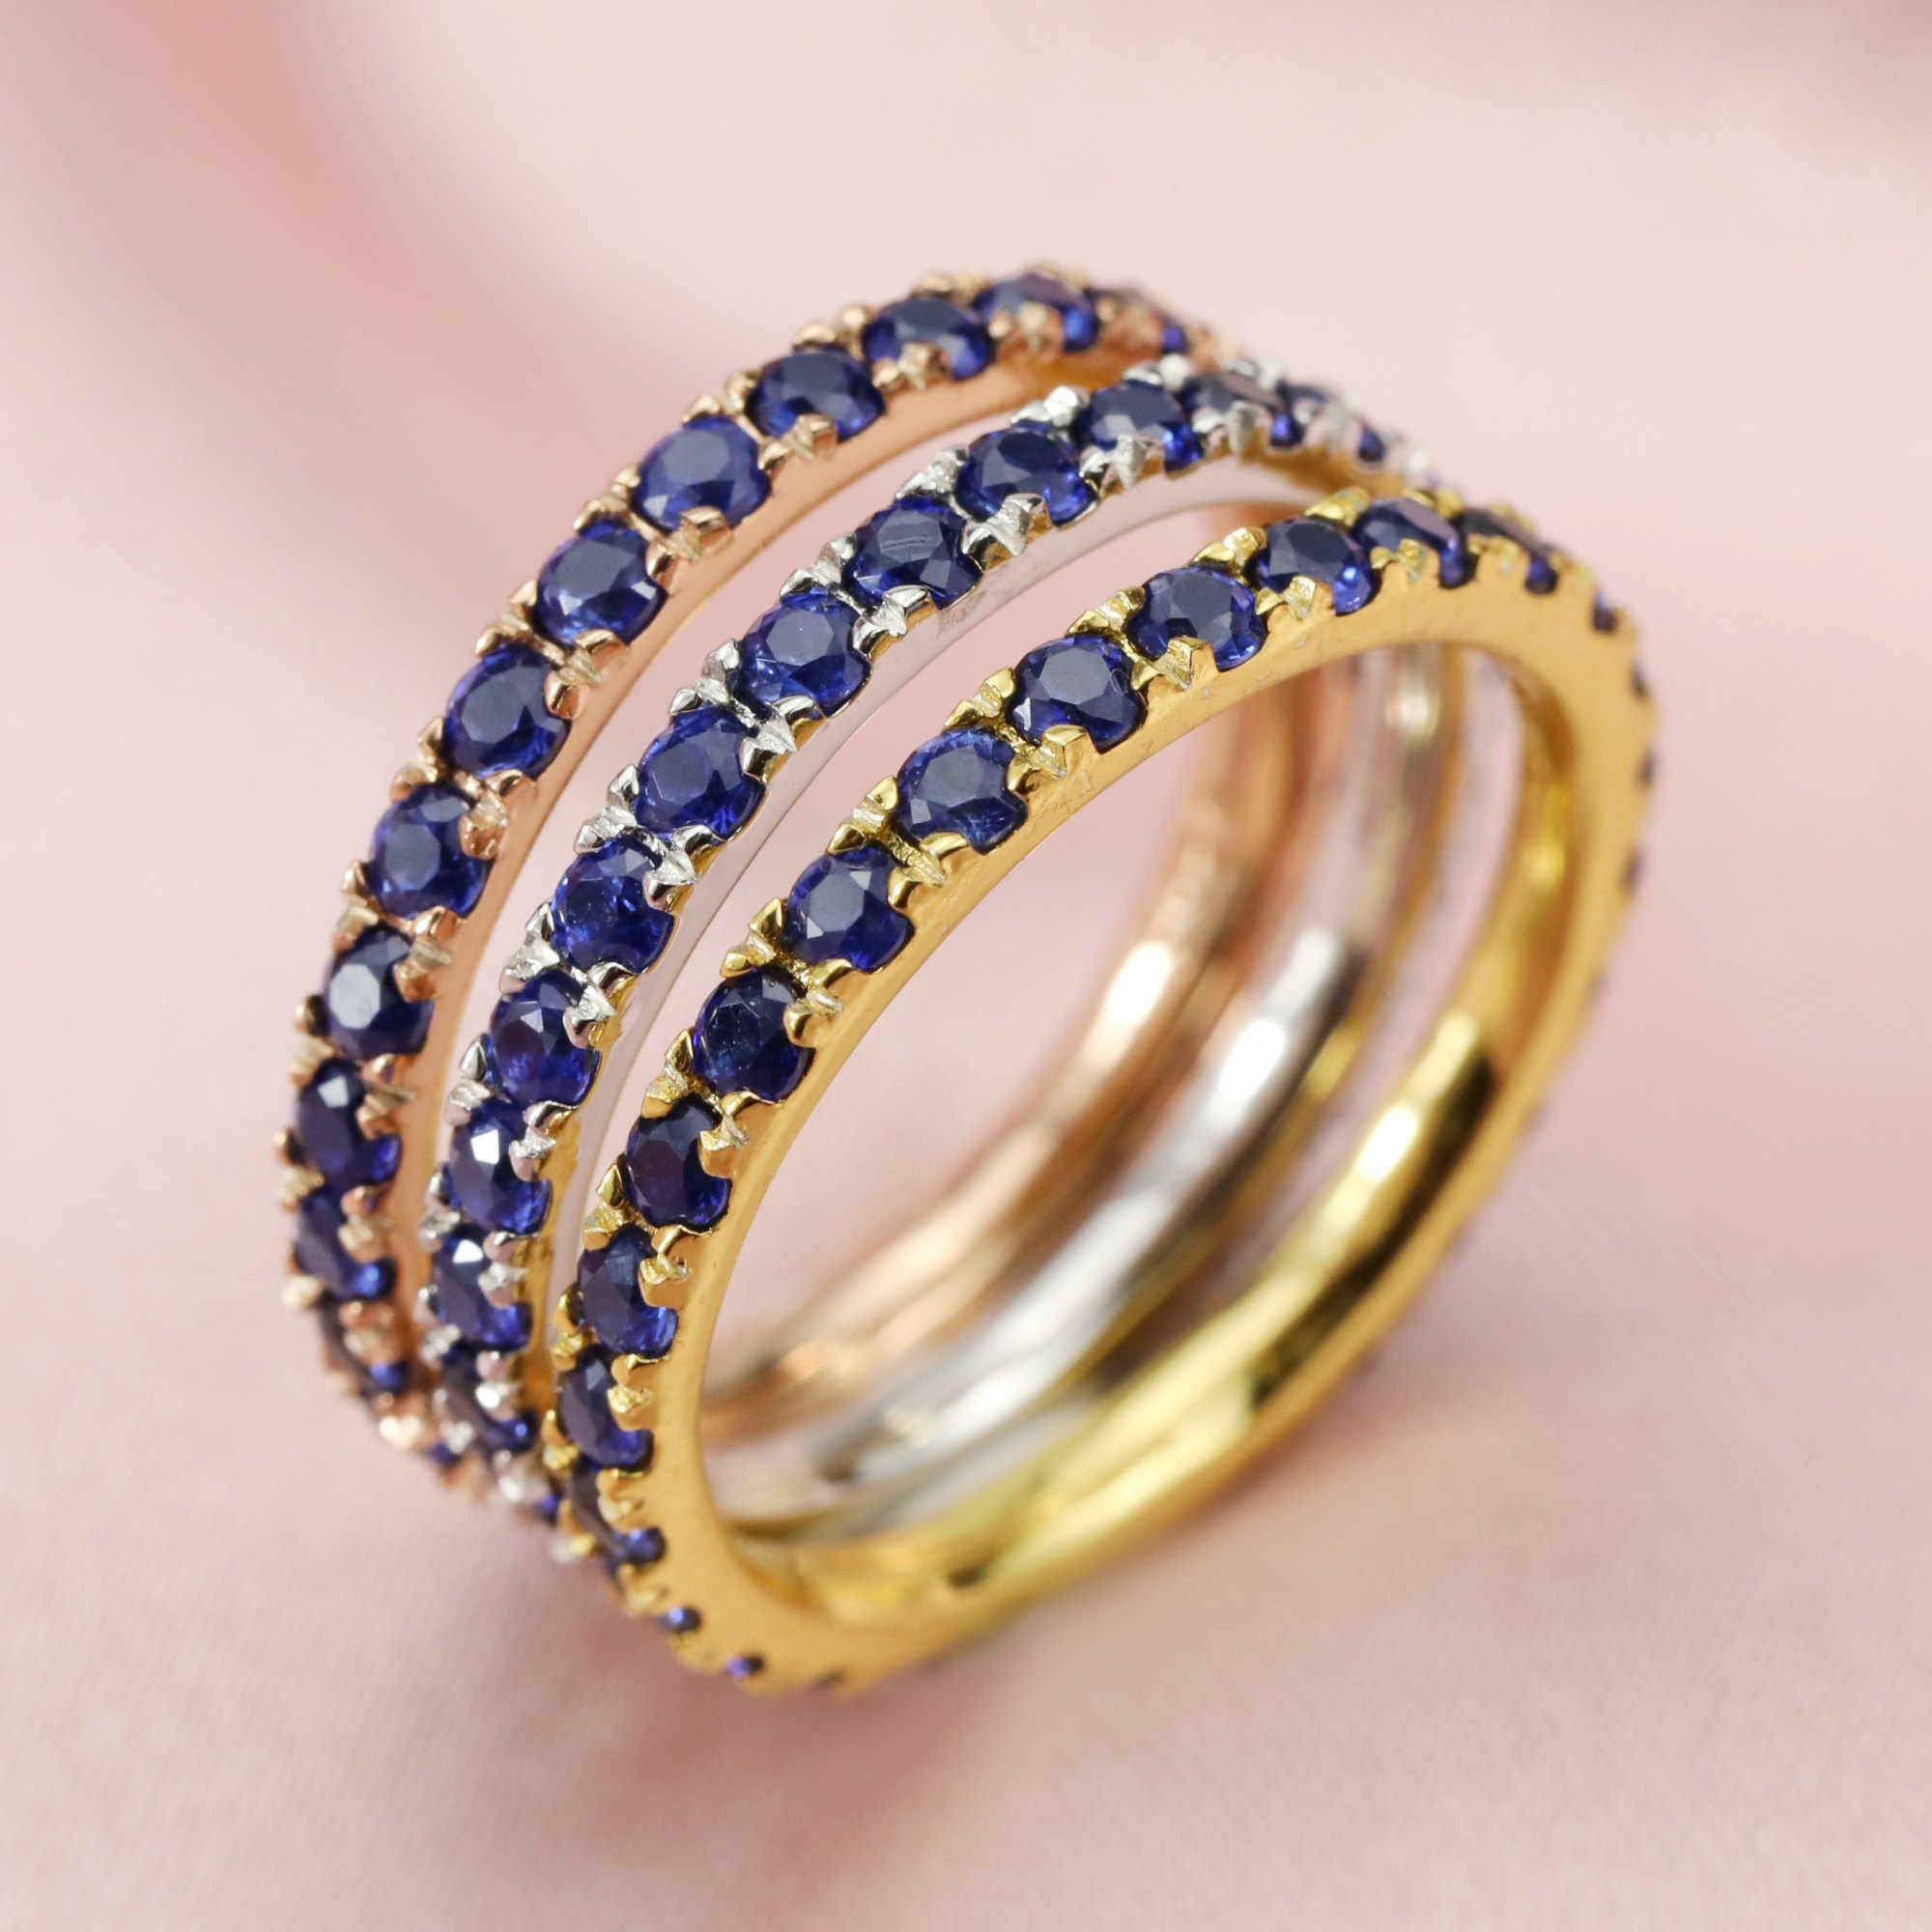 2MM Dainty September Birthstone Eternity Ring Blue Sapphire Gemstone Wedding Engagement Full Band Stackable Ring Solid 14K Gold Ring 1294300 - Click Image to Close